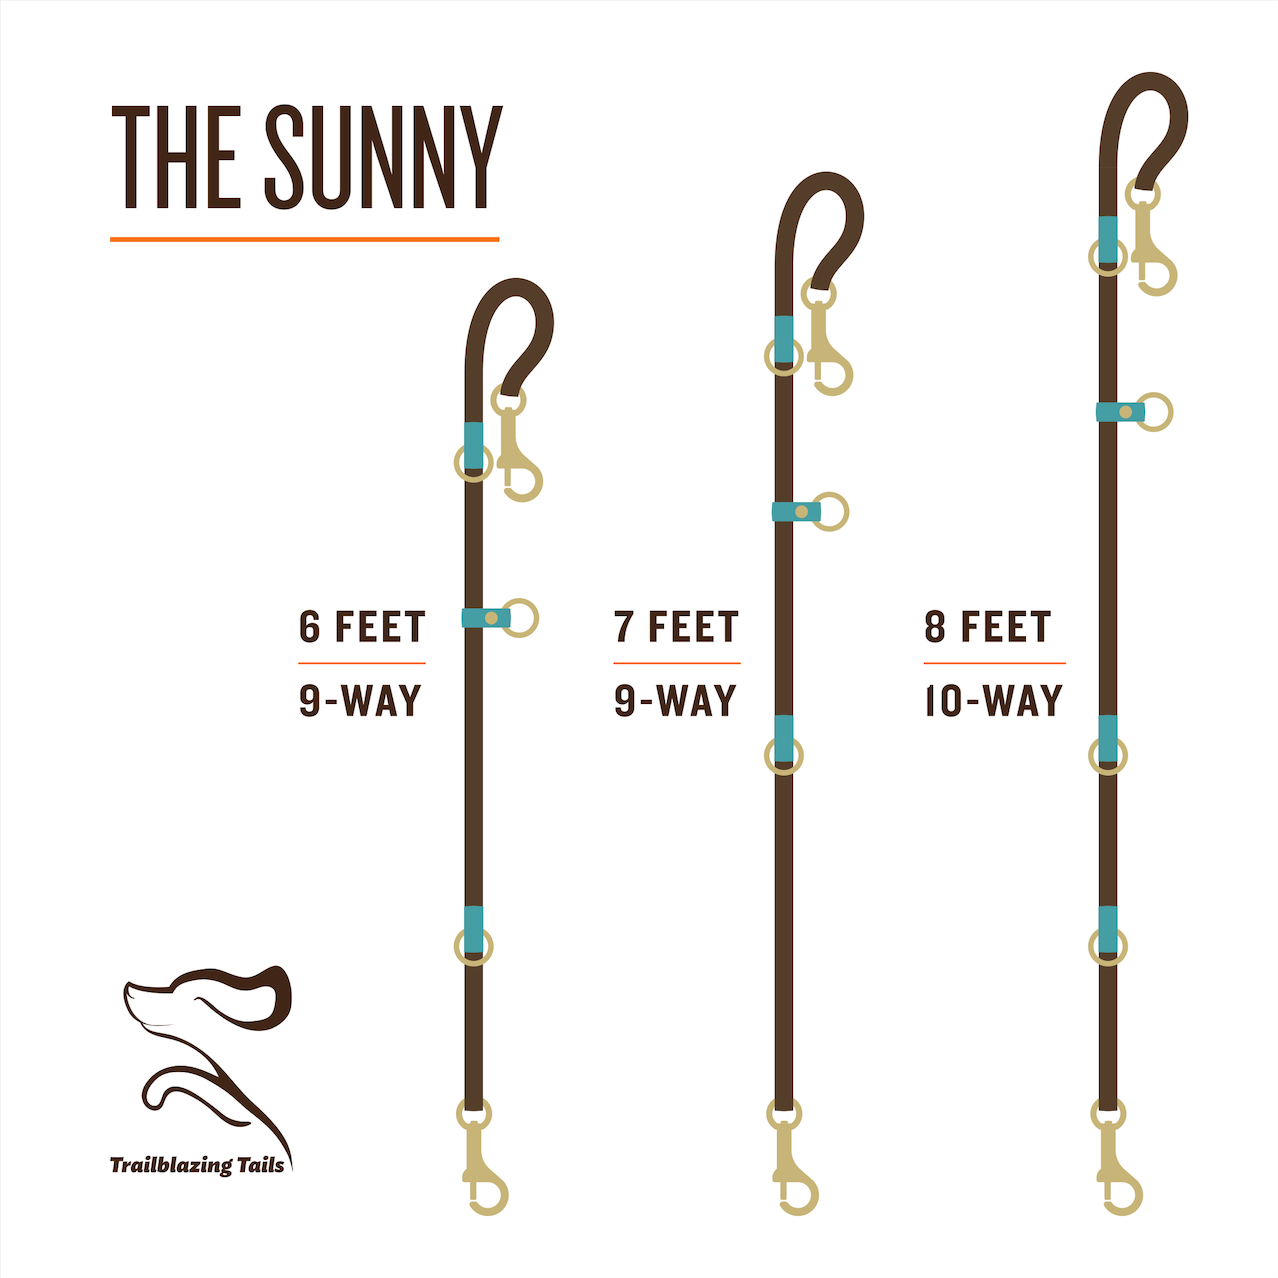 The adjustable length dog leash, Trailblazing Tails: The Sunny (current stock) by Your Whole Dog, is perfect for sunny strolls with your furry companion.